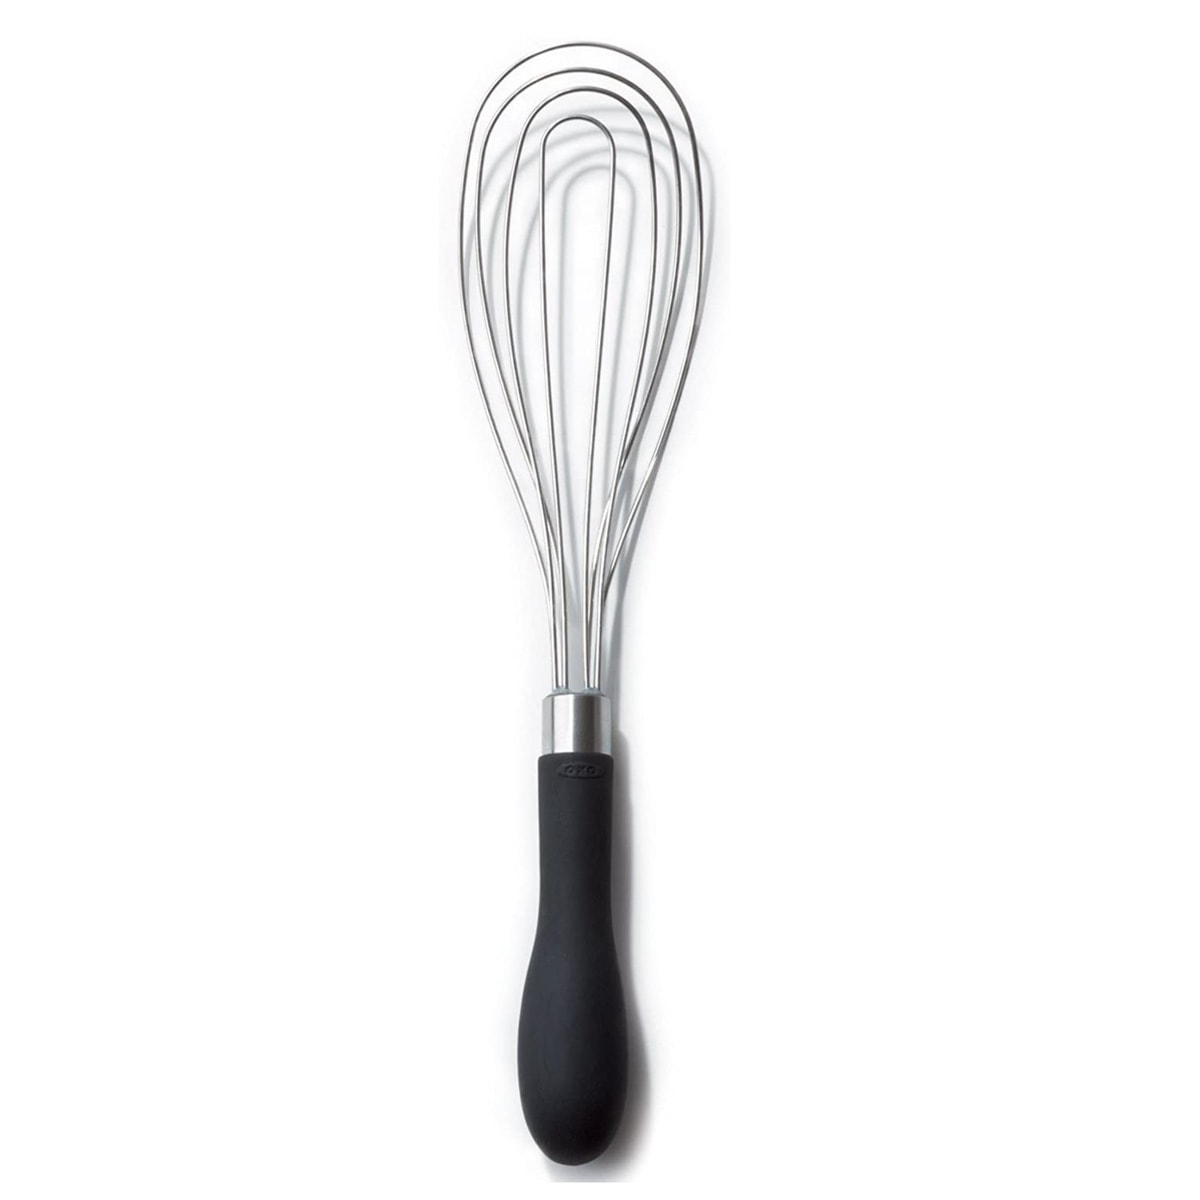 A flat stainless steel whisk.